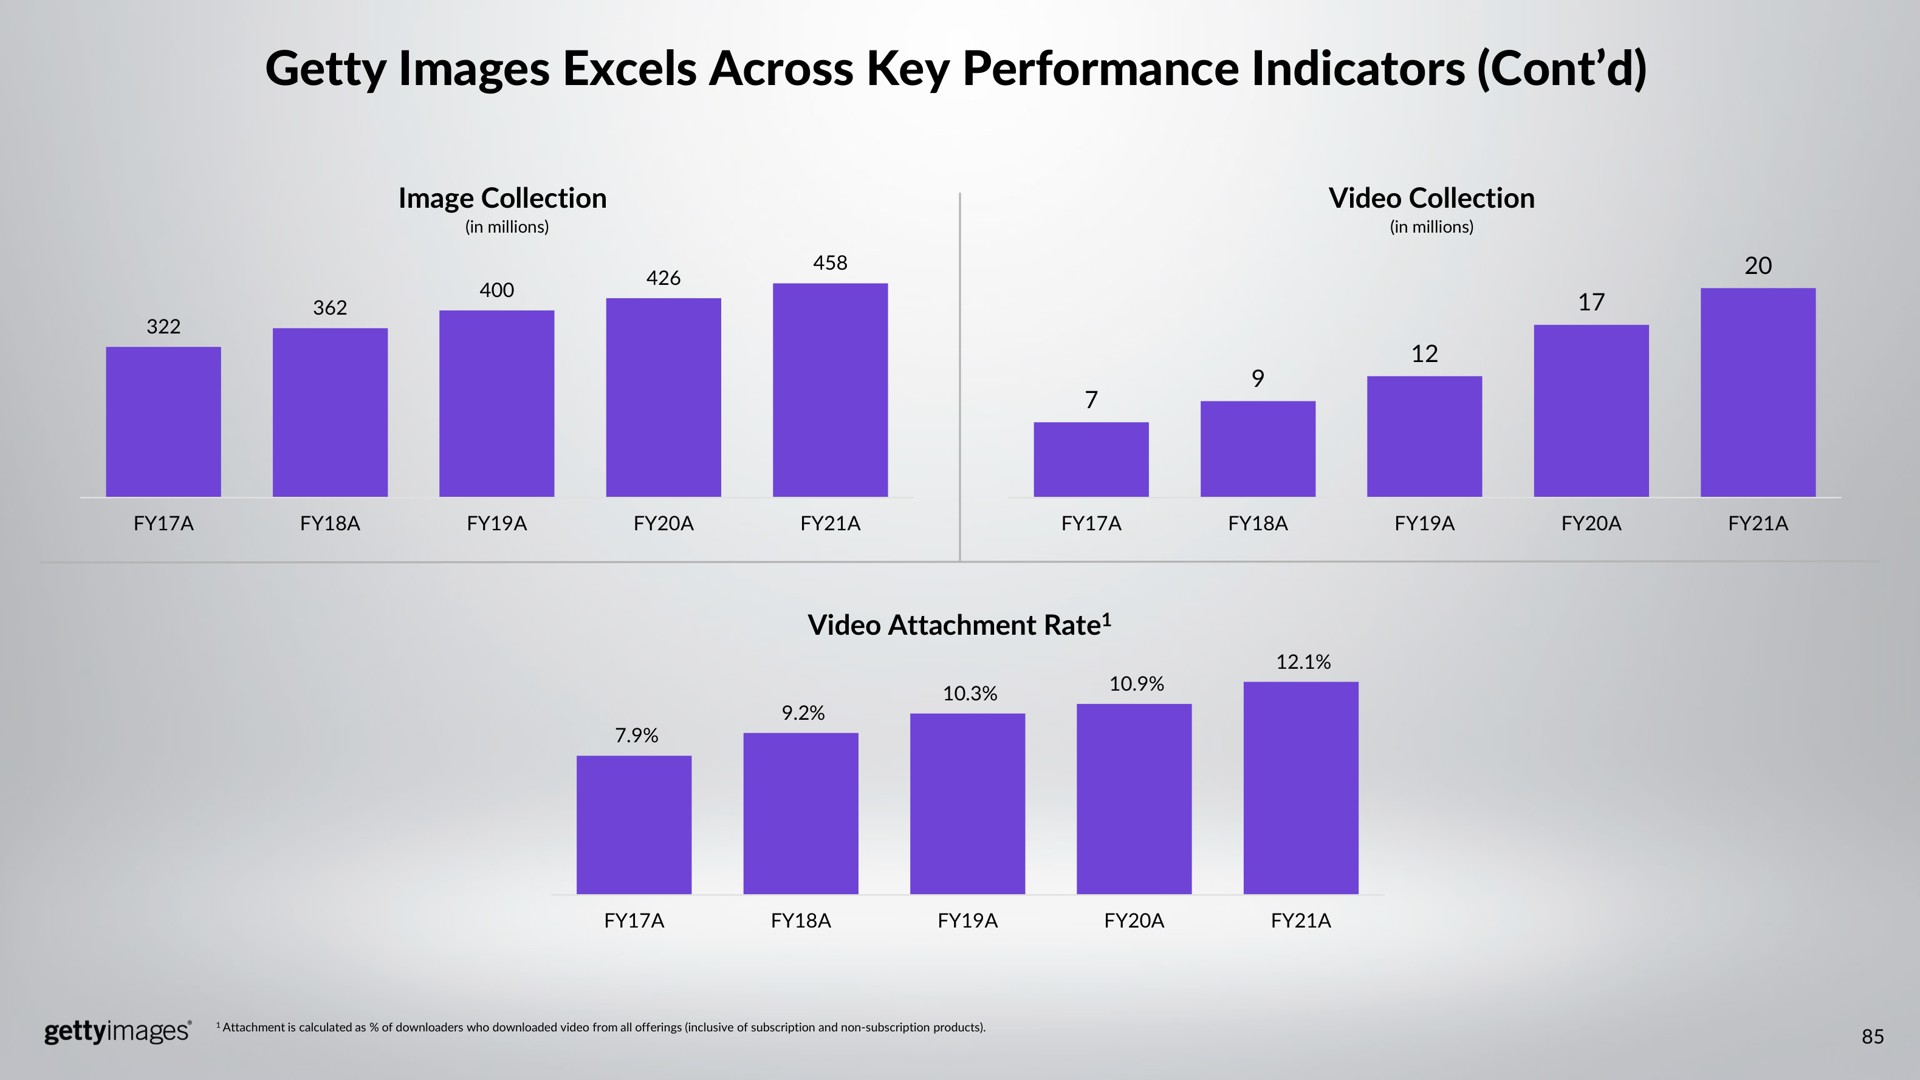 images excels across key performance indicators | Getty